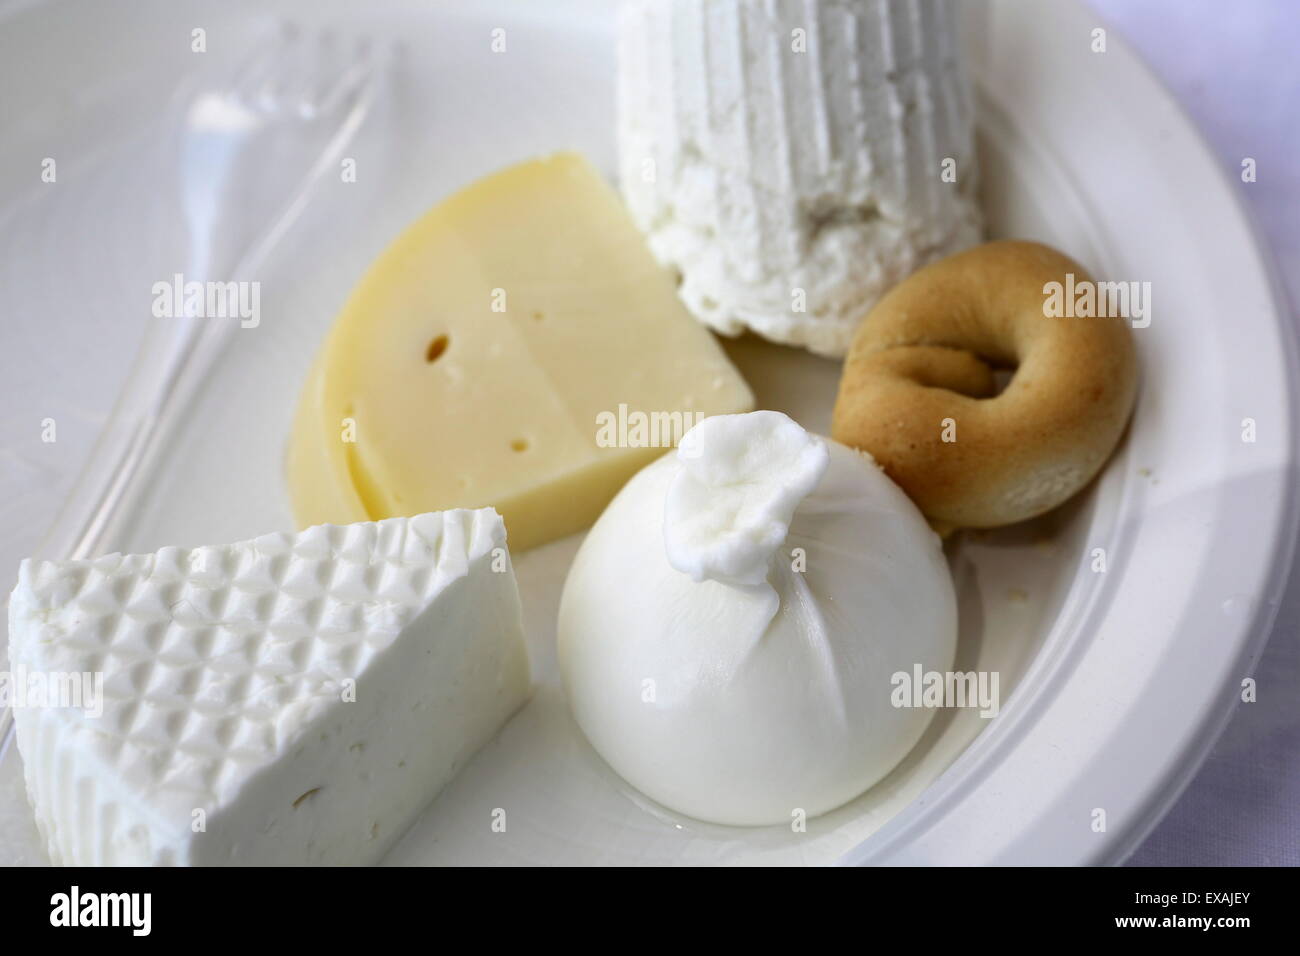 Freshly made Apulian cheeses, including Ricotta and Burrato, at a cheese factory near Martina Franca, Apulia, Italy, Europe Stock Photo